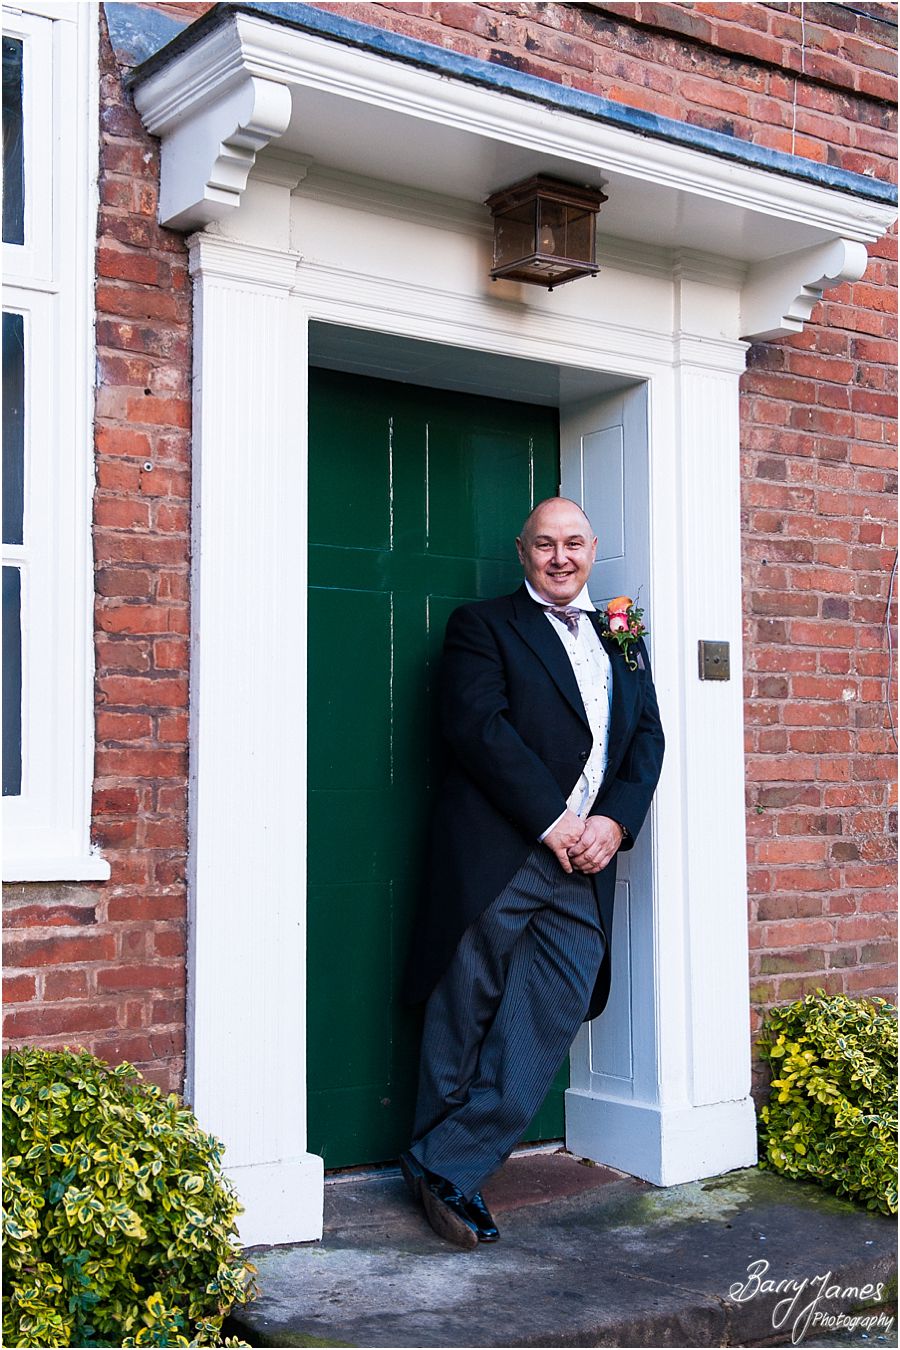 Candid creative relaxed wedding photography at The Moat House in Acton Trussell by Recommended Wedding Photographer Barry James